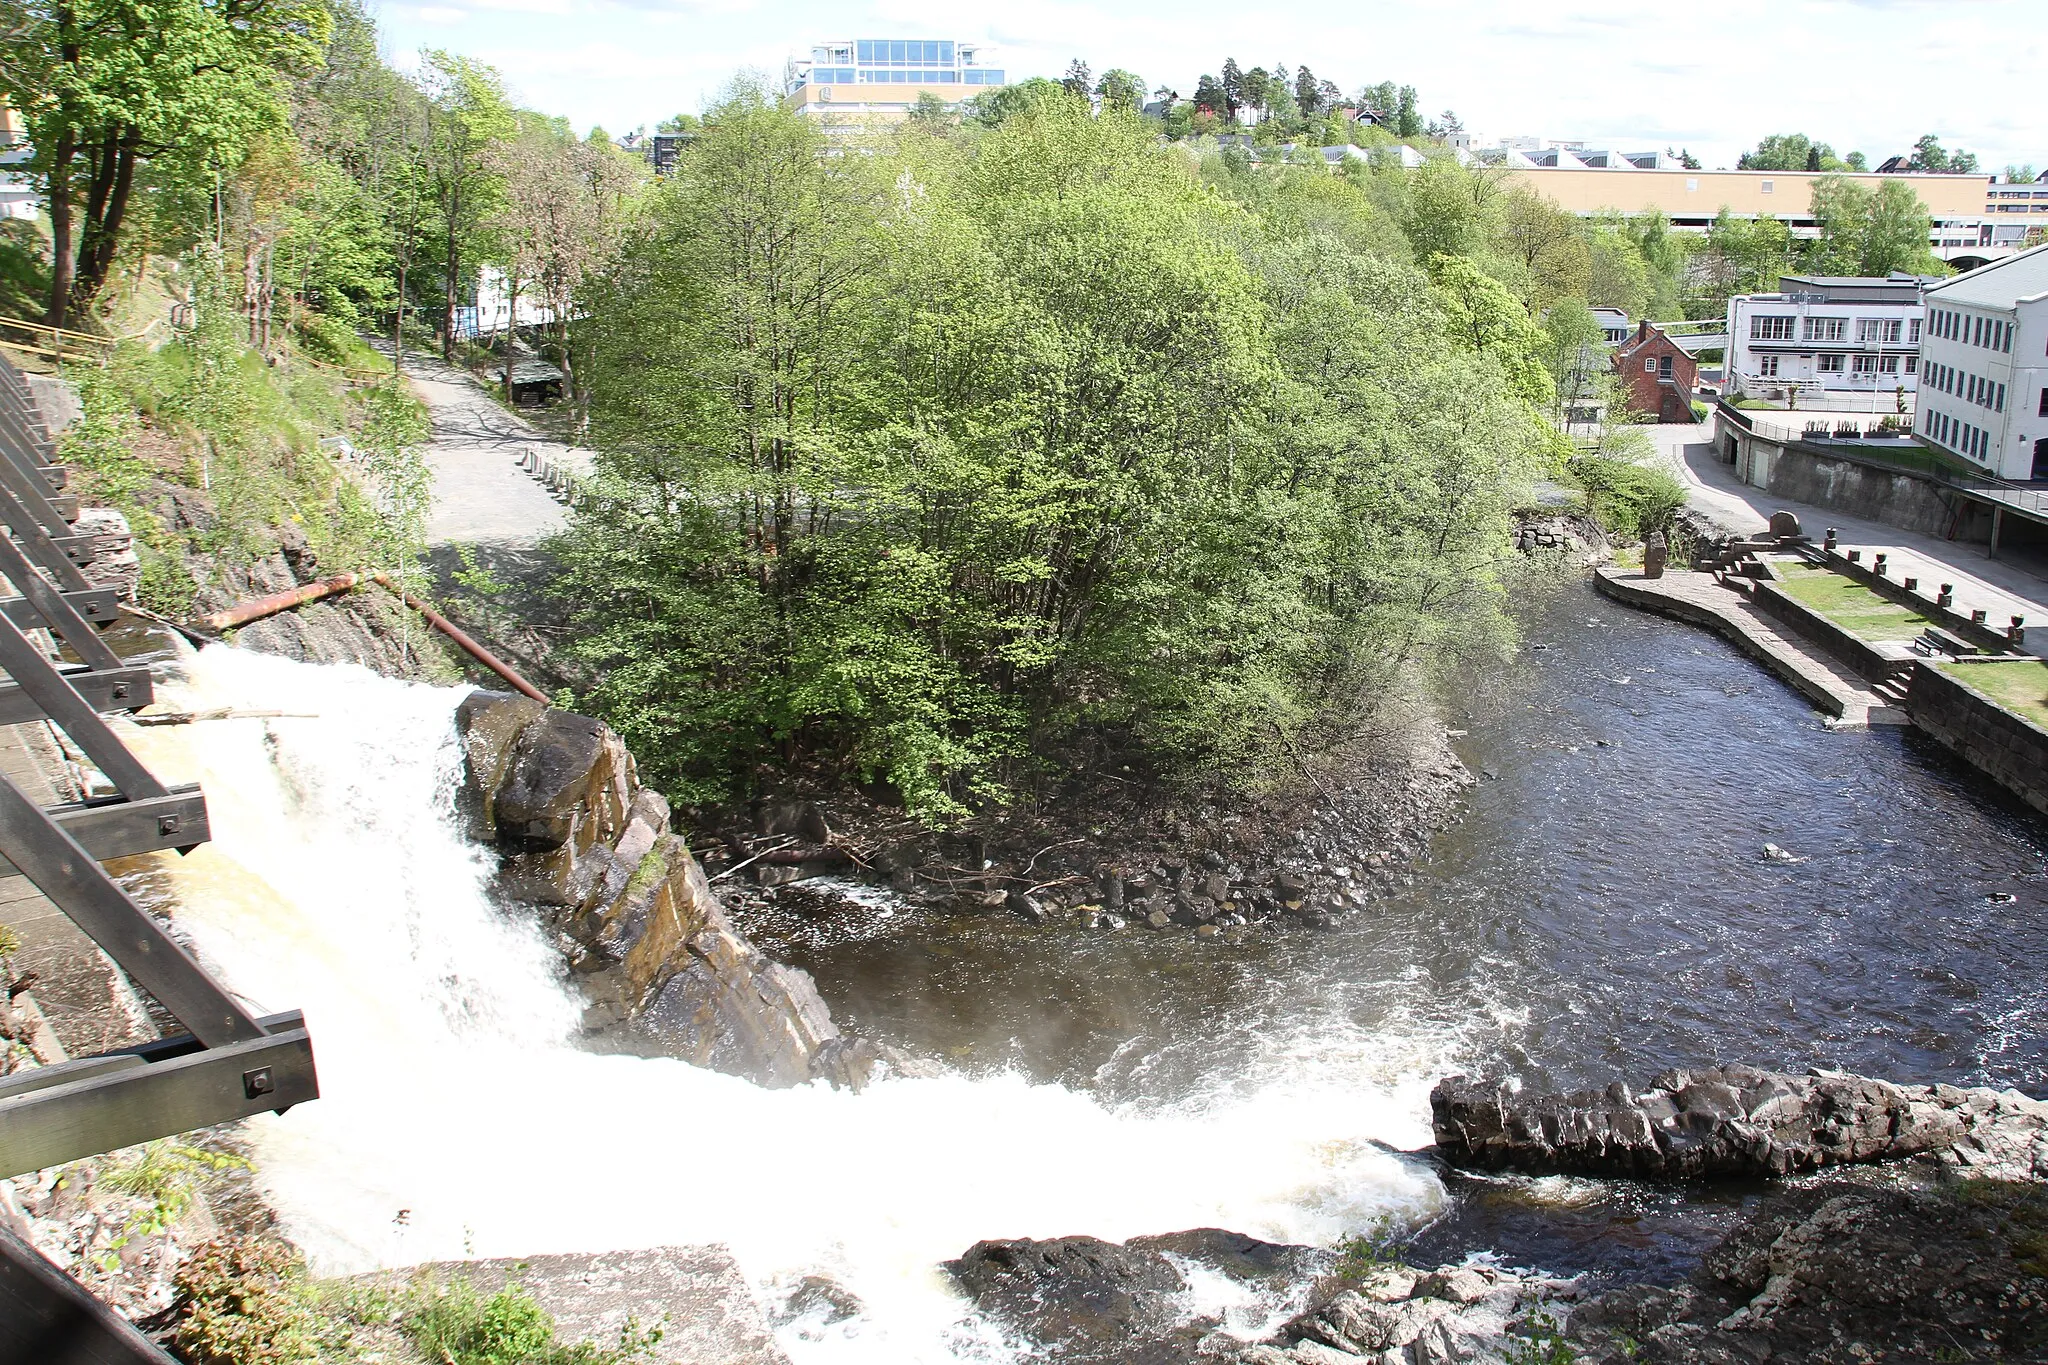 Photo showing: Granfossen waterfall in the lower Reach of Lysakerelva river, forming the border between Bærum and Oslo, Norway. The waterfall here at Fåbro (Granfos) was utilized to start up Granfos Brug paper factory in 1869.